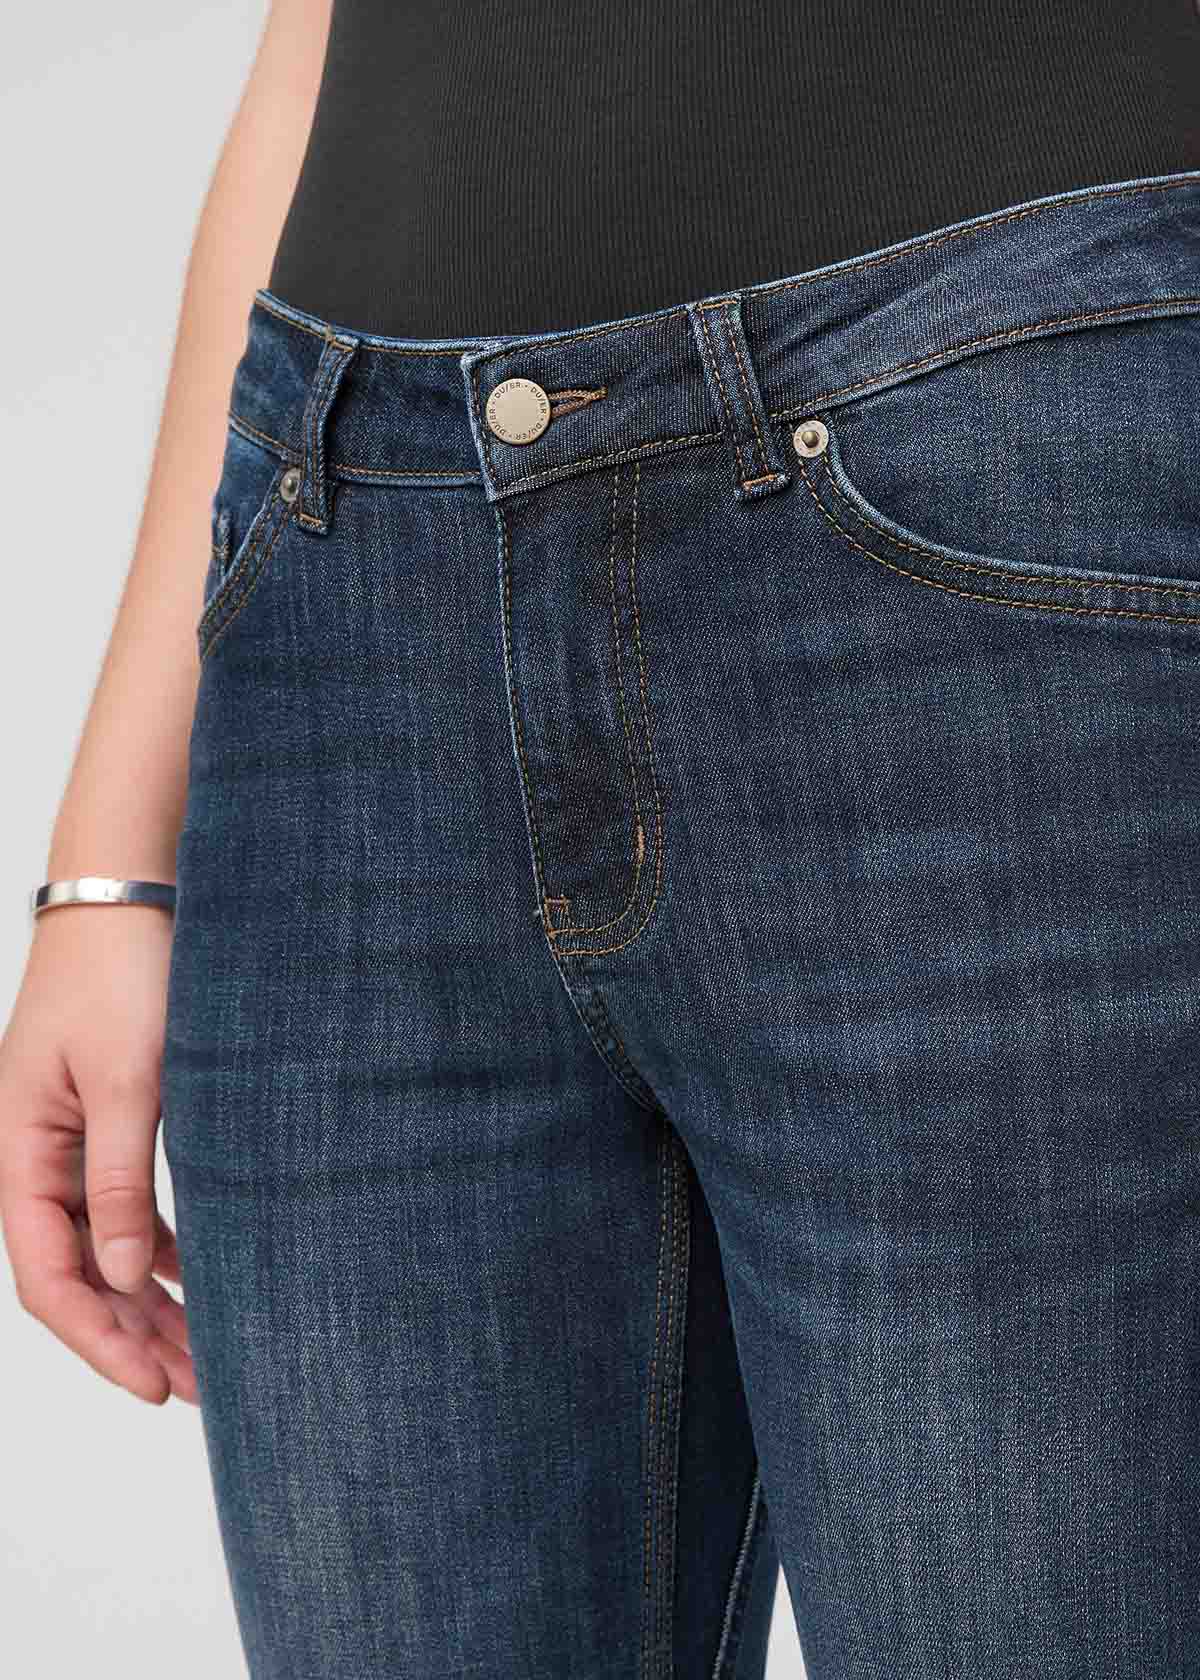 Women's Heritage Blue Relaxed Fit Stretch Jeans